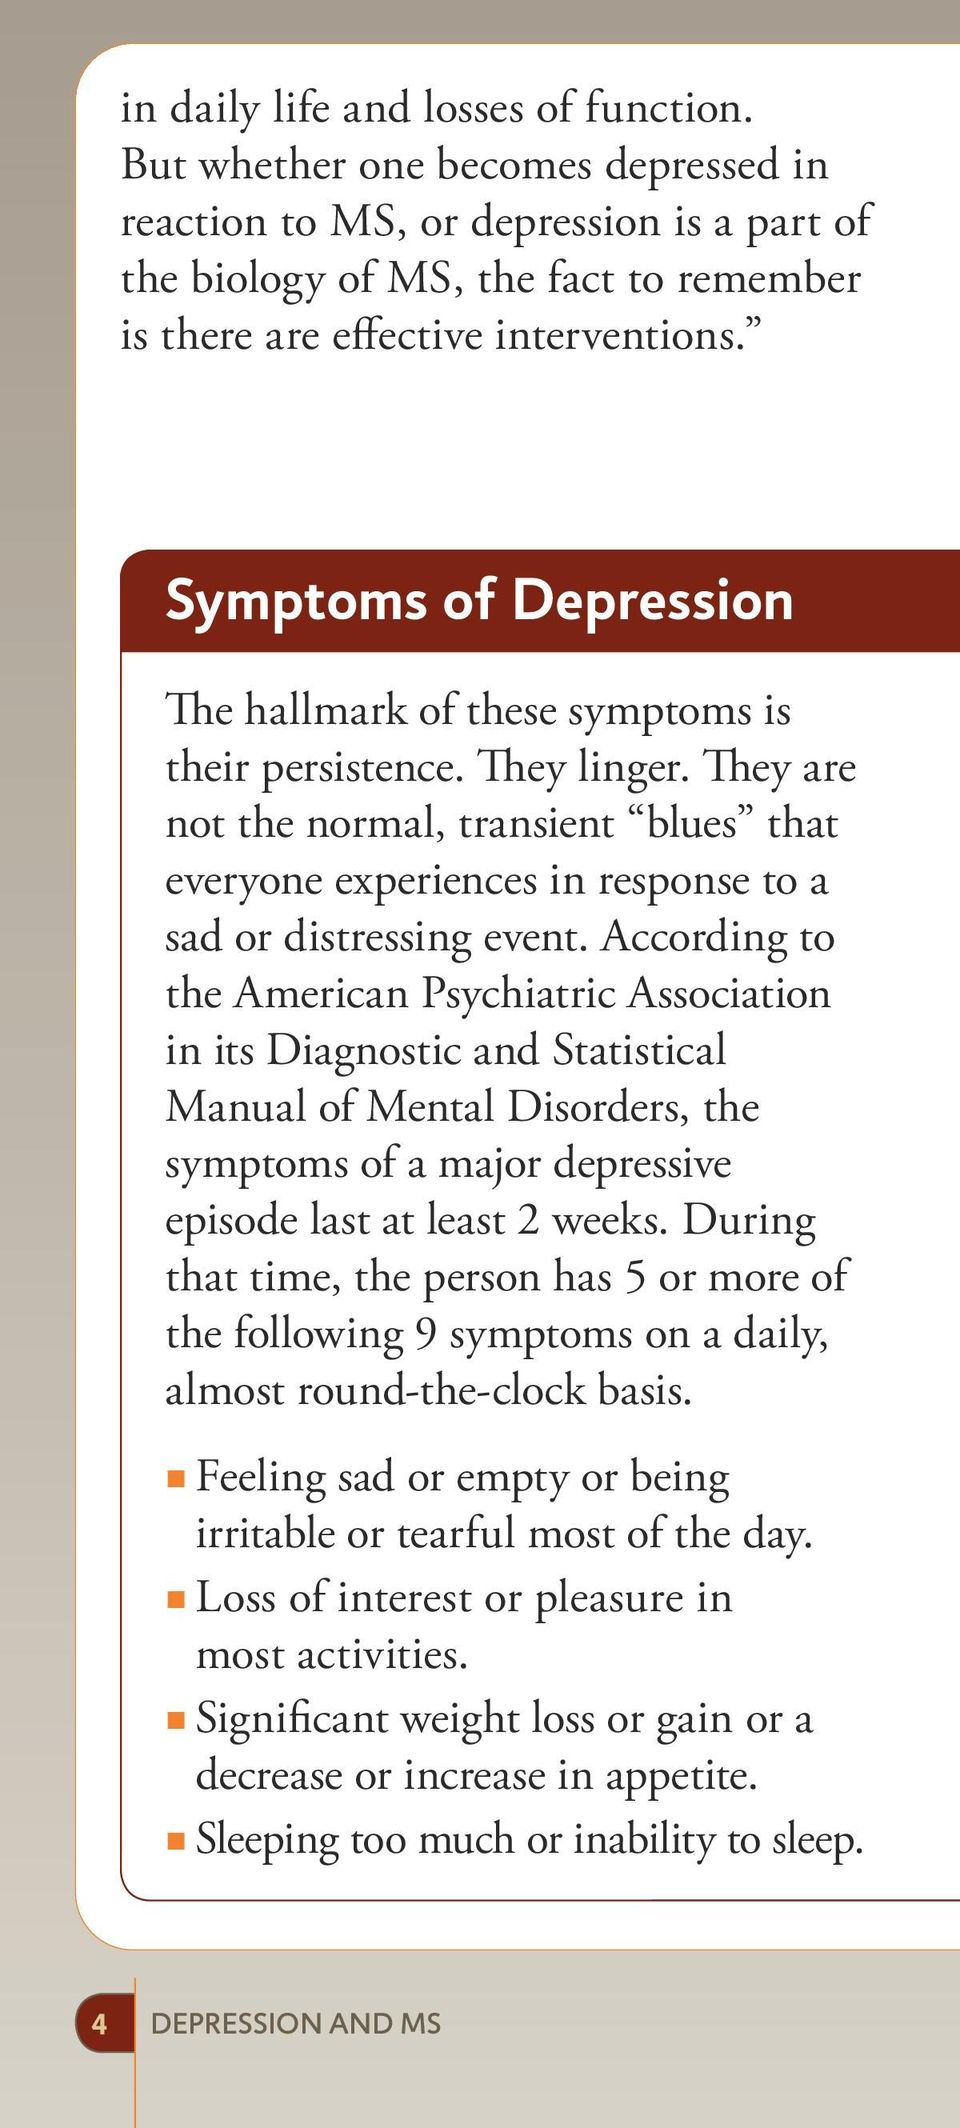 According to the American Psychiatric Association in its Diagnostic and Statistical Manual of Mental Disorders, the symptoms of a major depressive episode last at least 2 weeks.